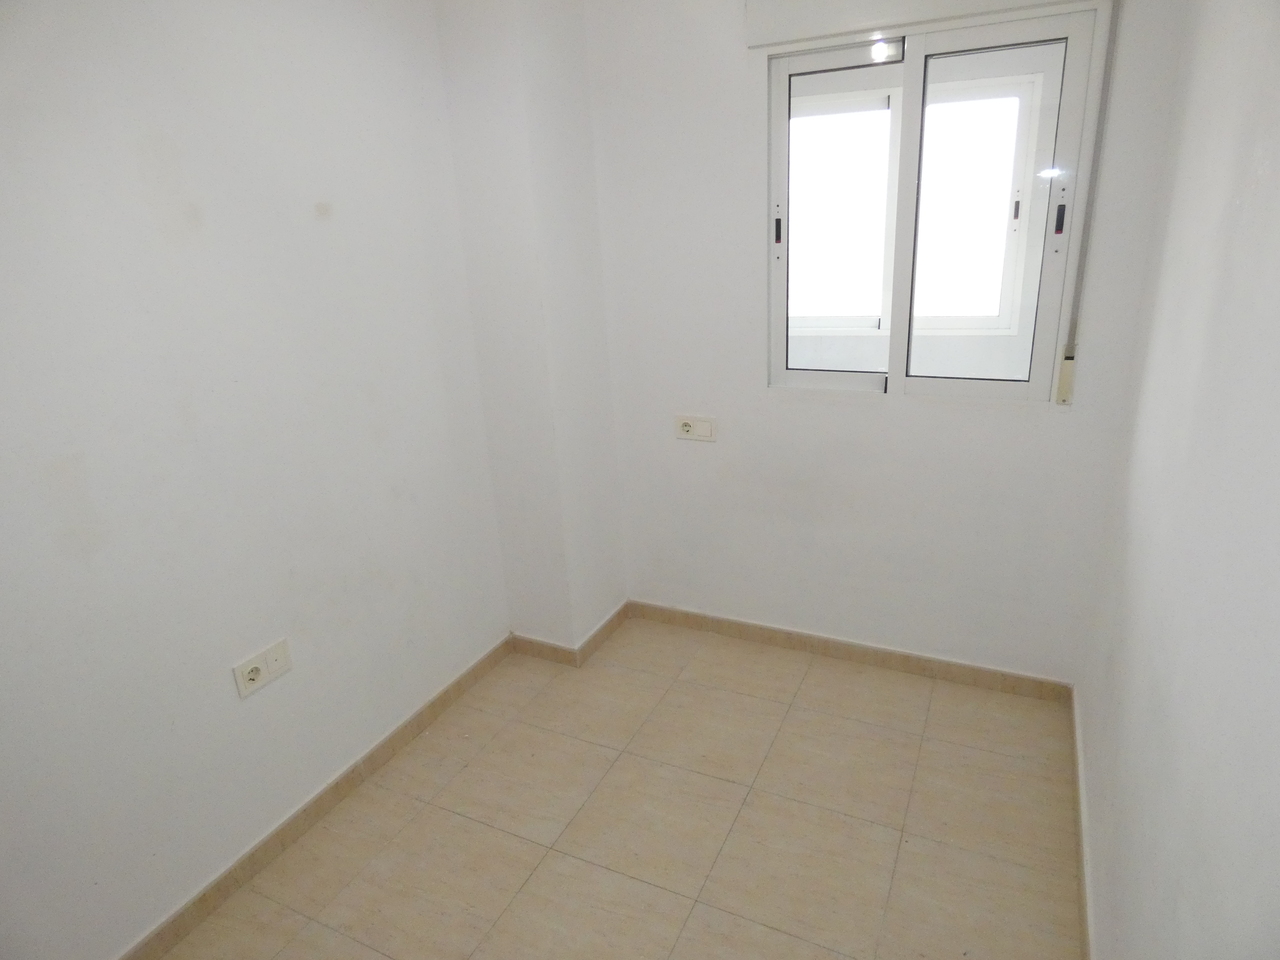 HCB-573: Apartment for sale in Algorfa